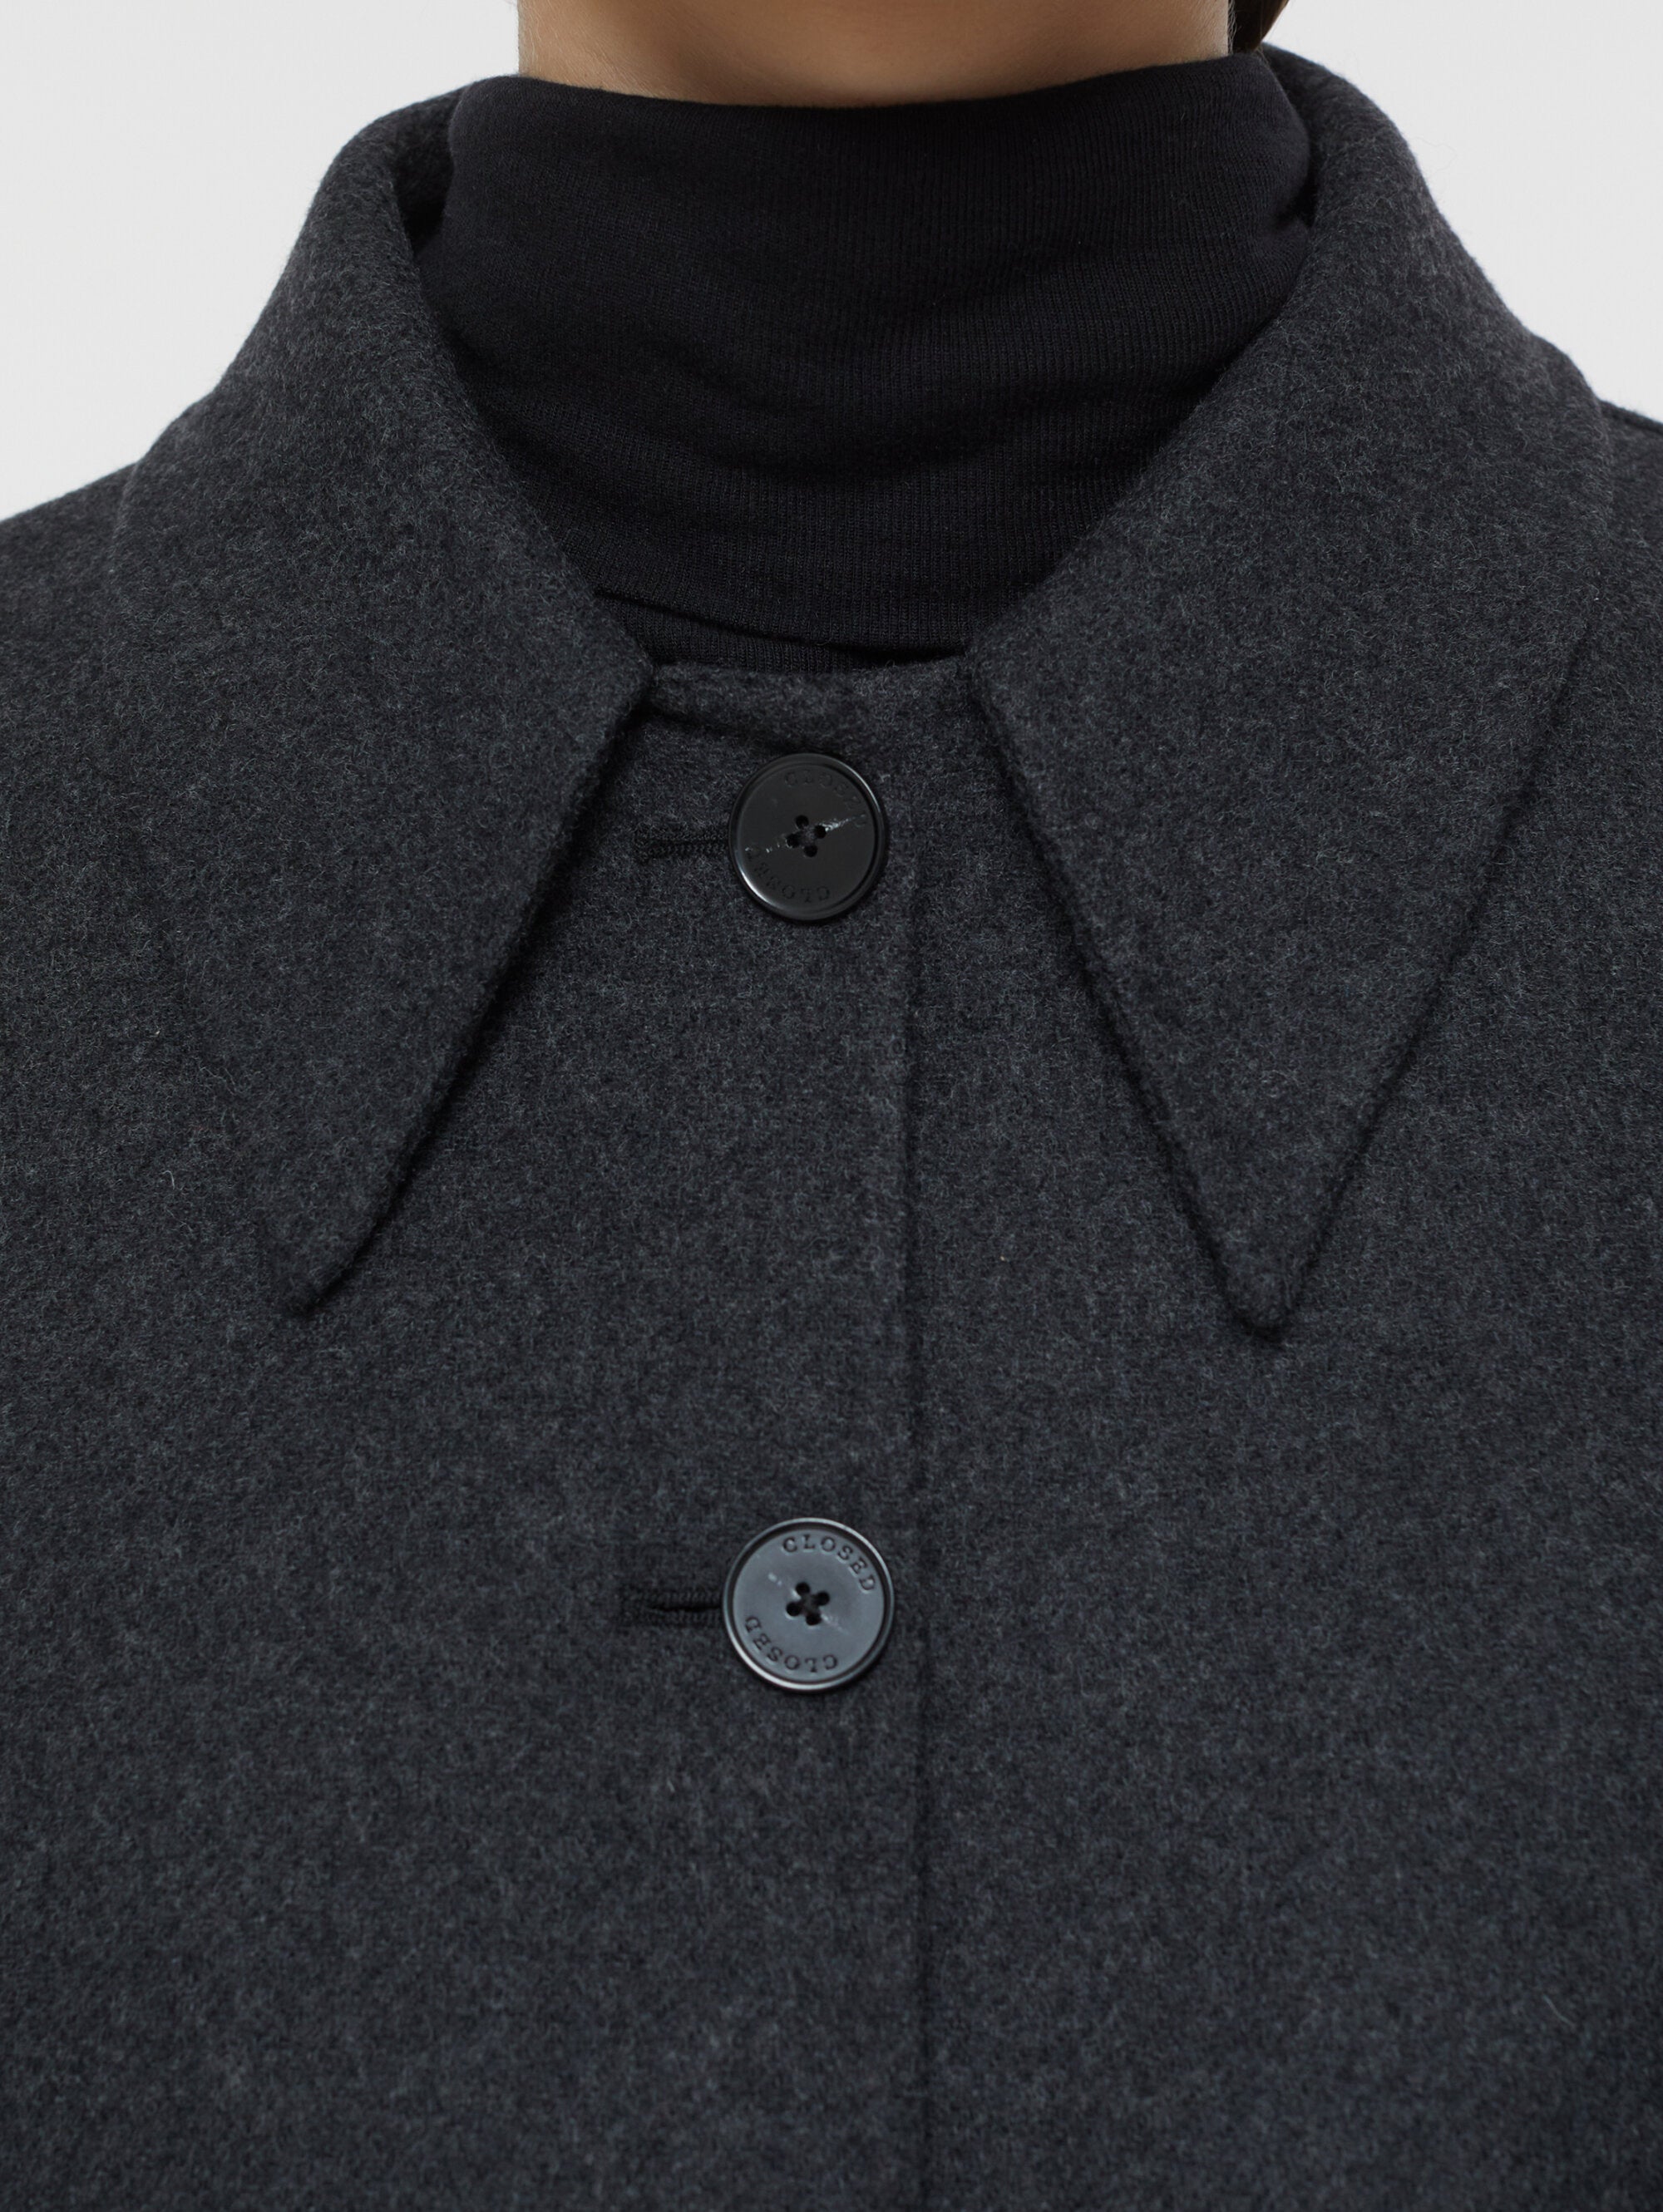 Short Jacket in Black Double Wool Cloth